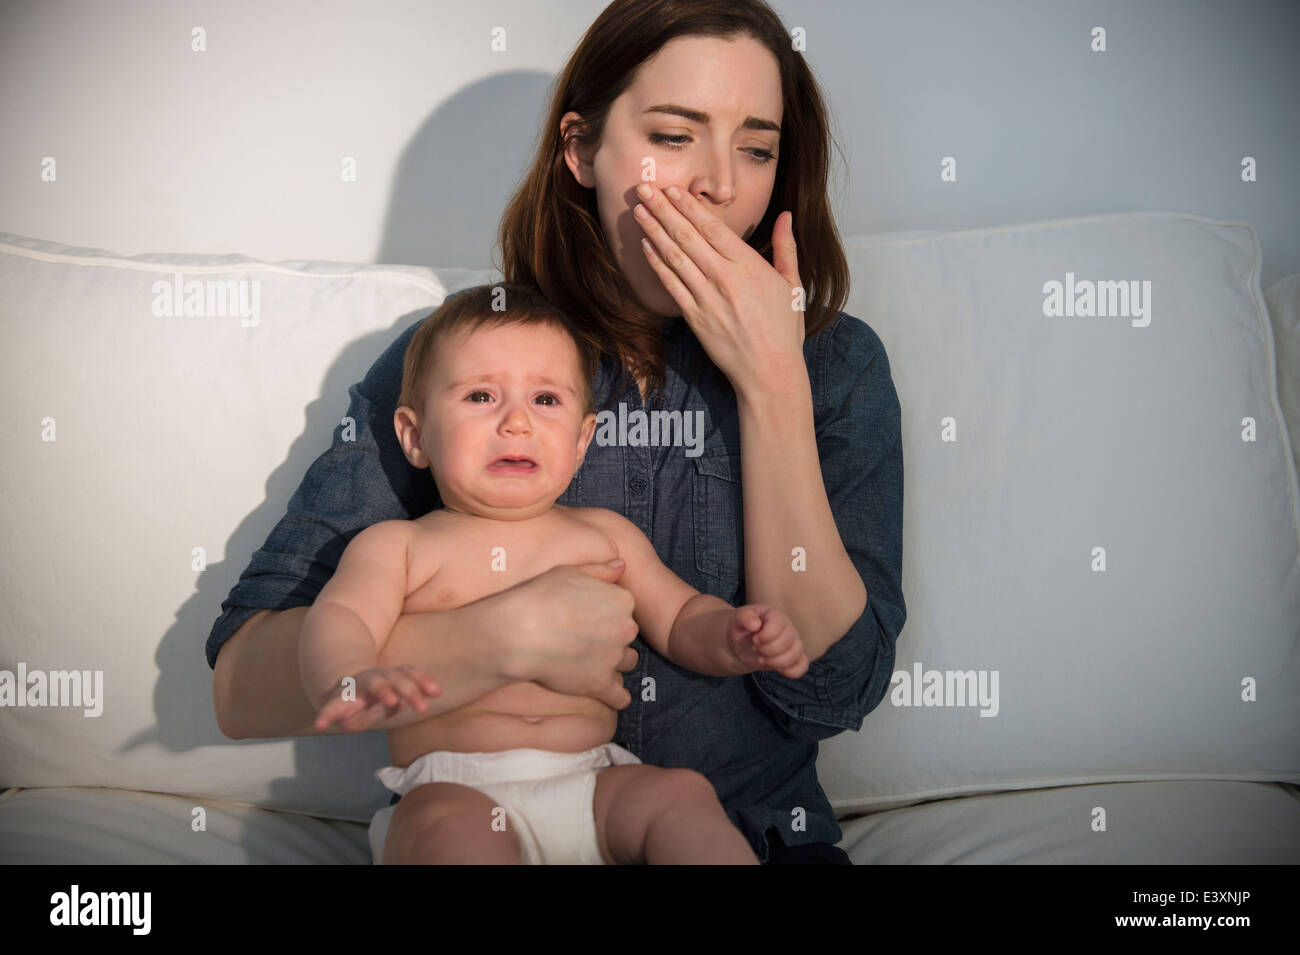 Tired mother holding crying baby Stock Photo